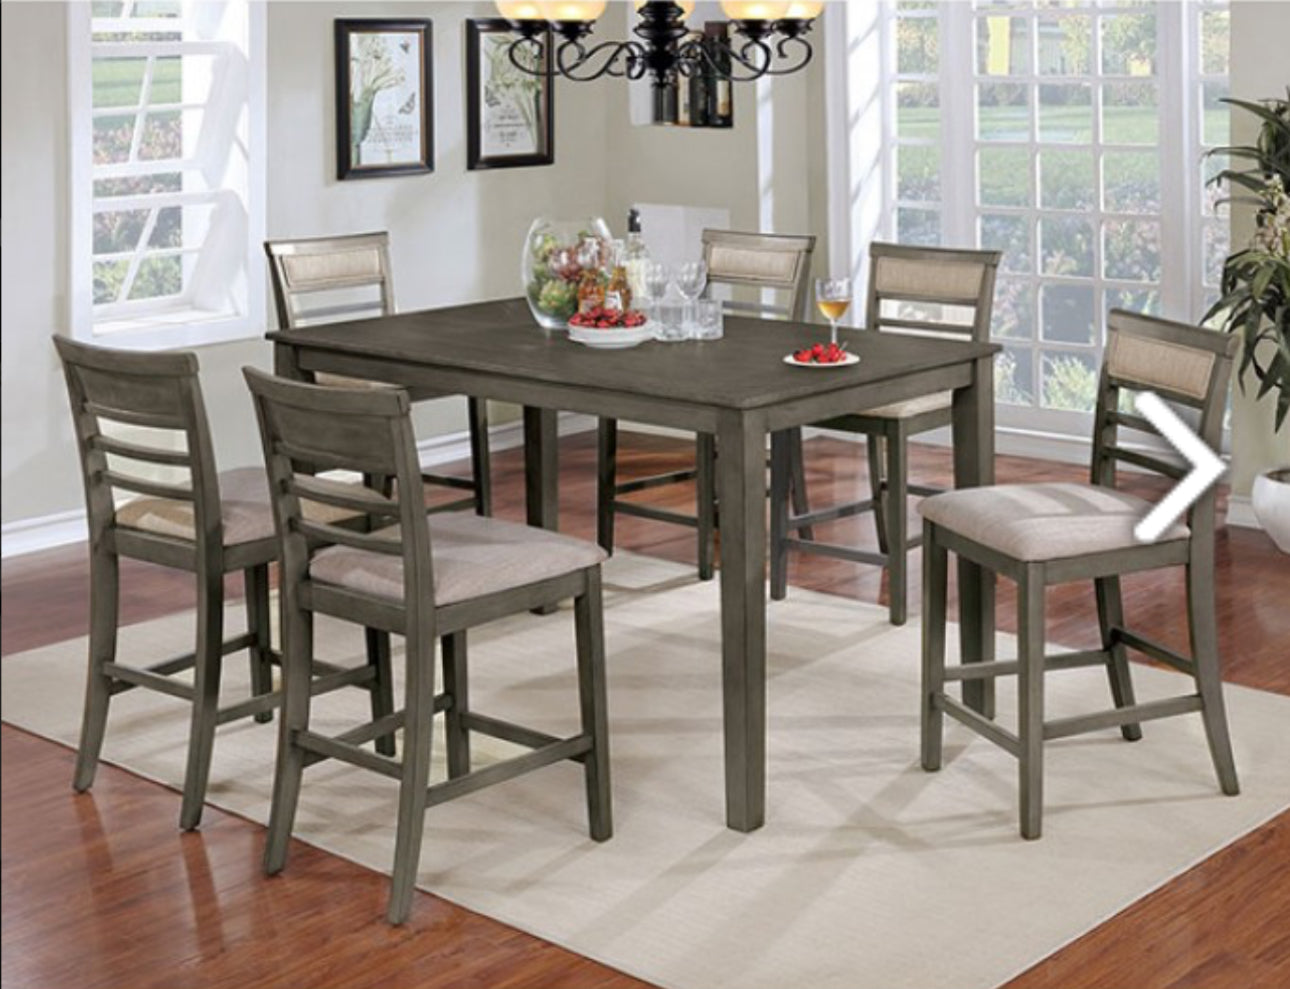 7PC COUNTER HEIGHT DINING SET